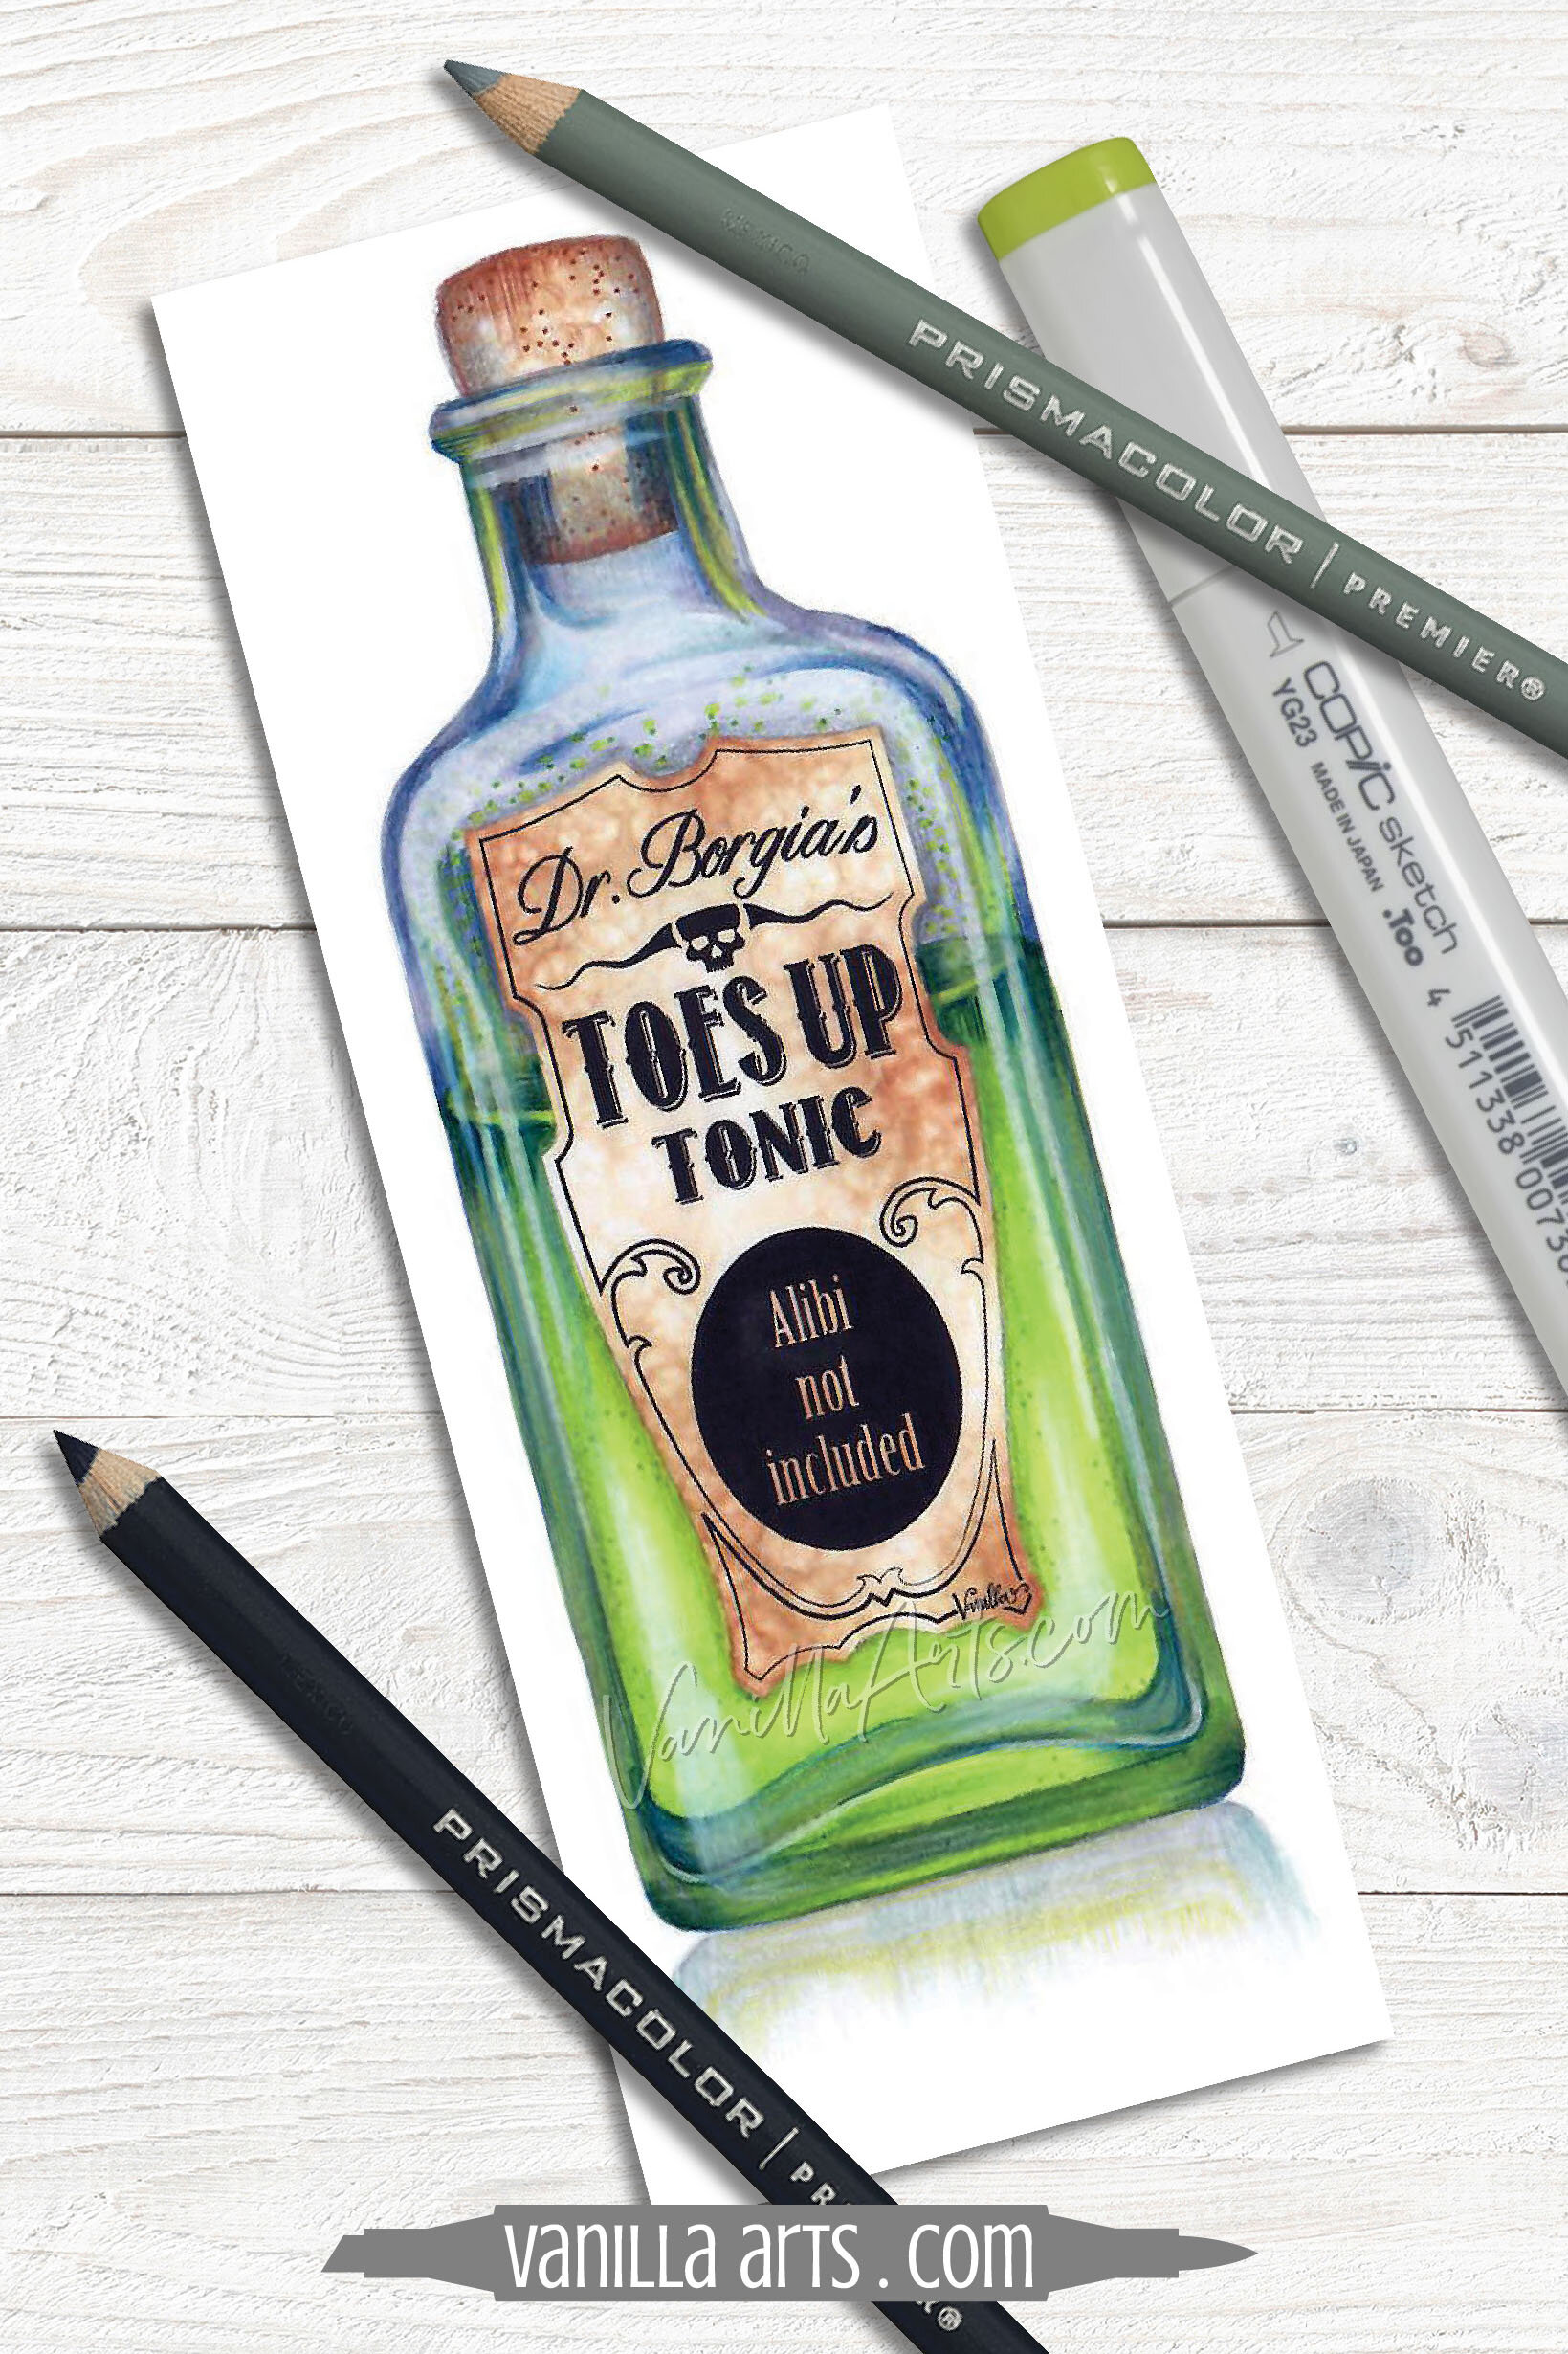 All About Alcohol Markers: Everything You Need to Know to Make